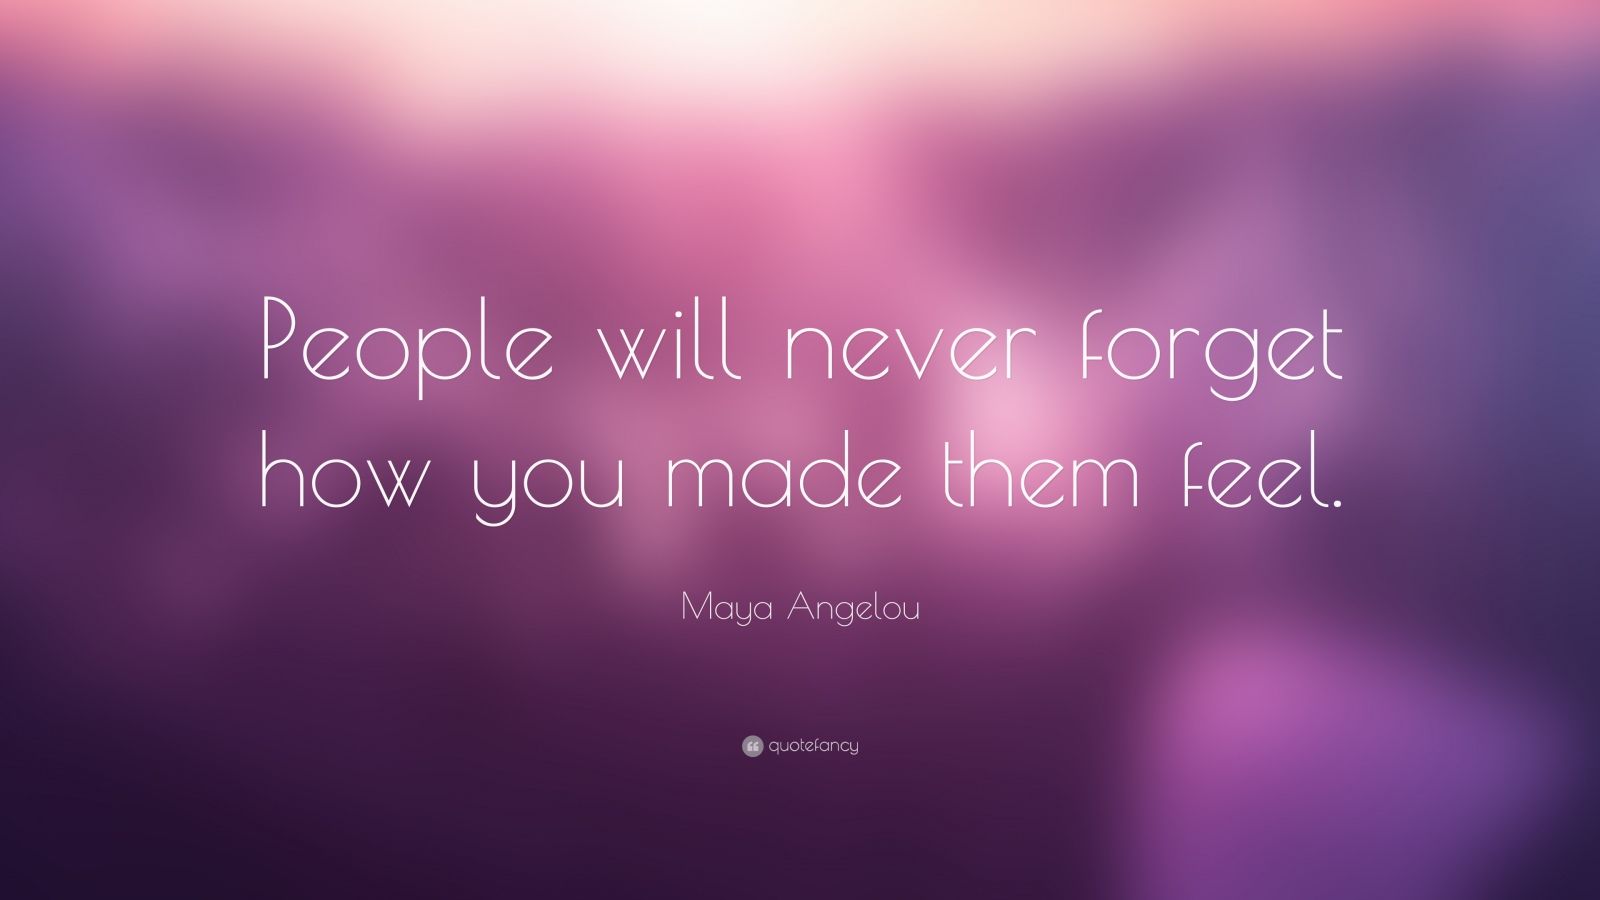 Maya Angelou Quote: “People will never forget how you made them feel.”